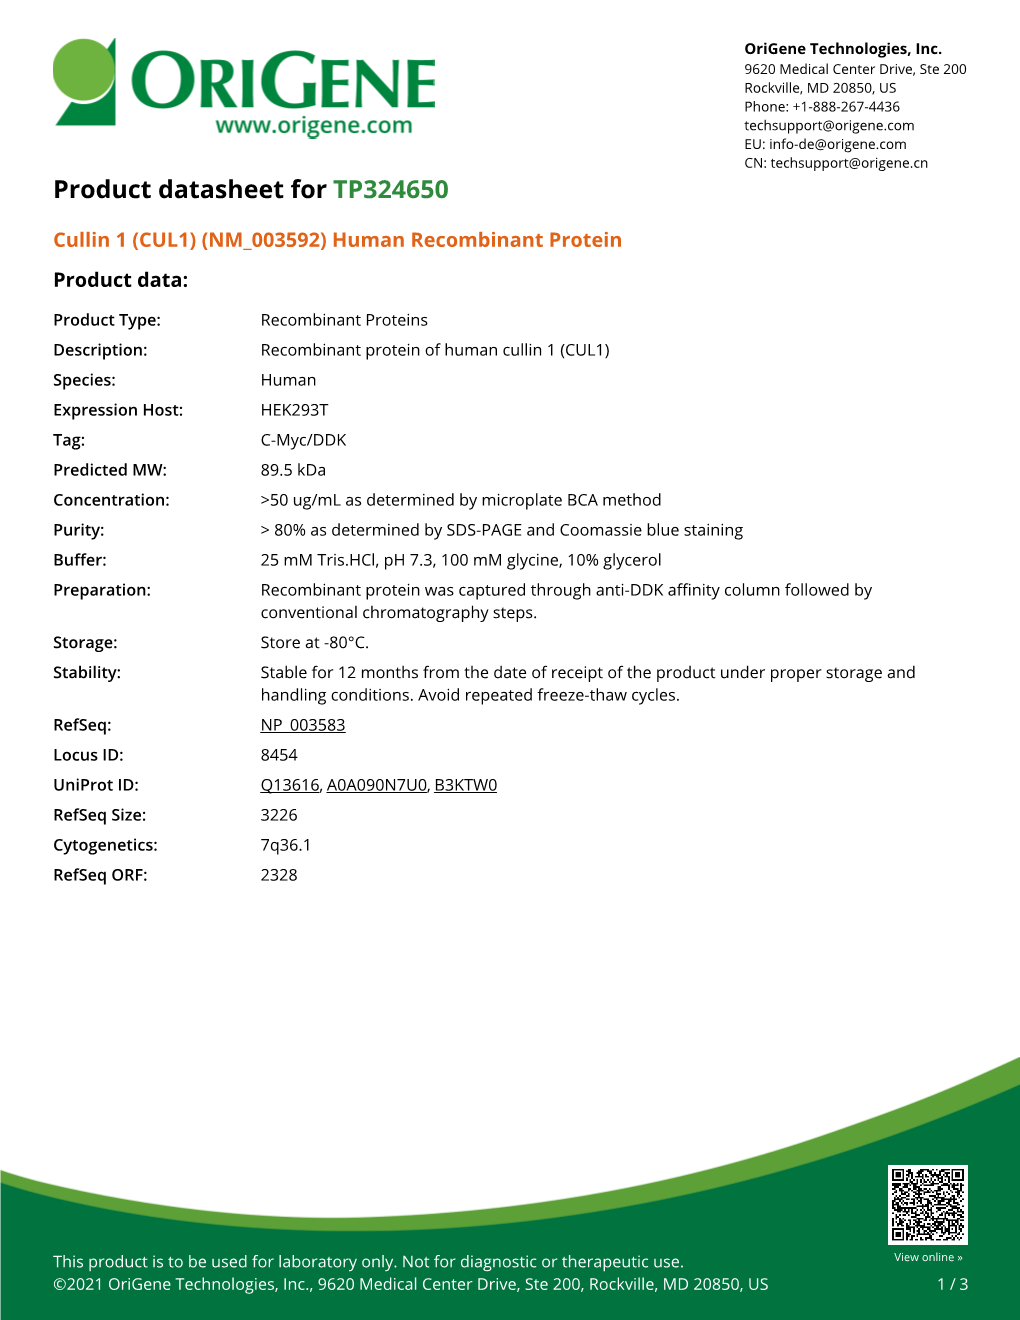 (CUL1) (NM 003592) Human Recombinant Protein Product Data